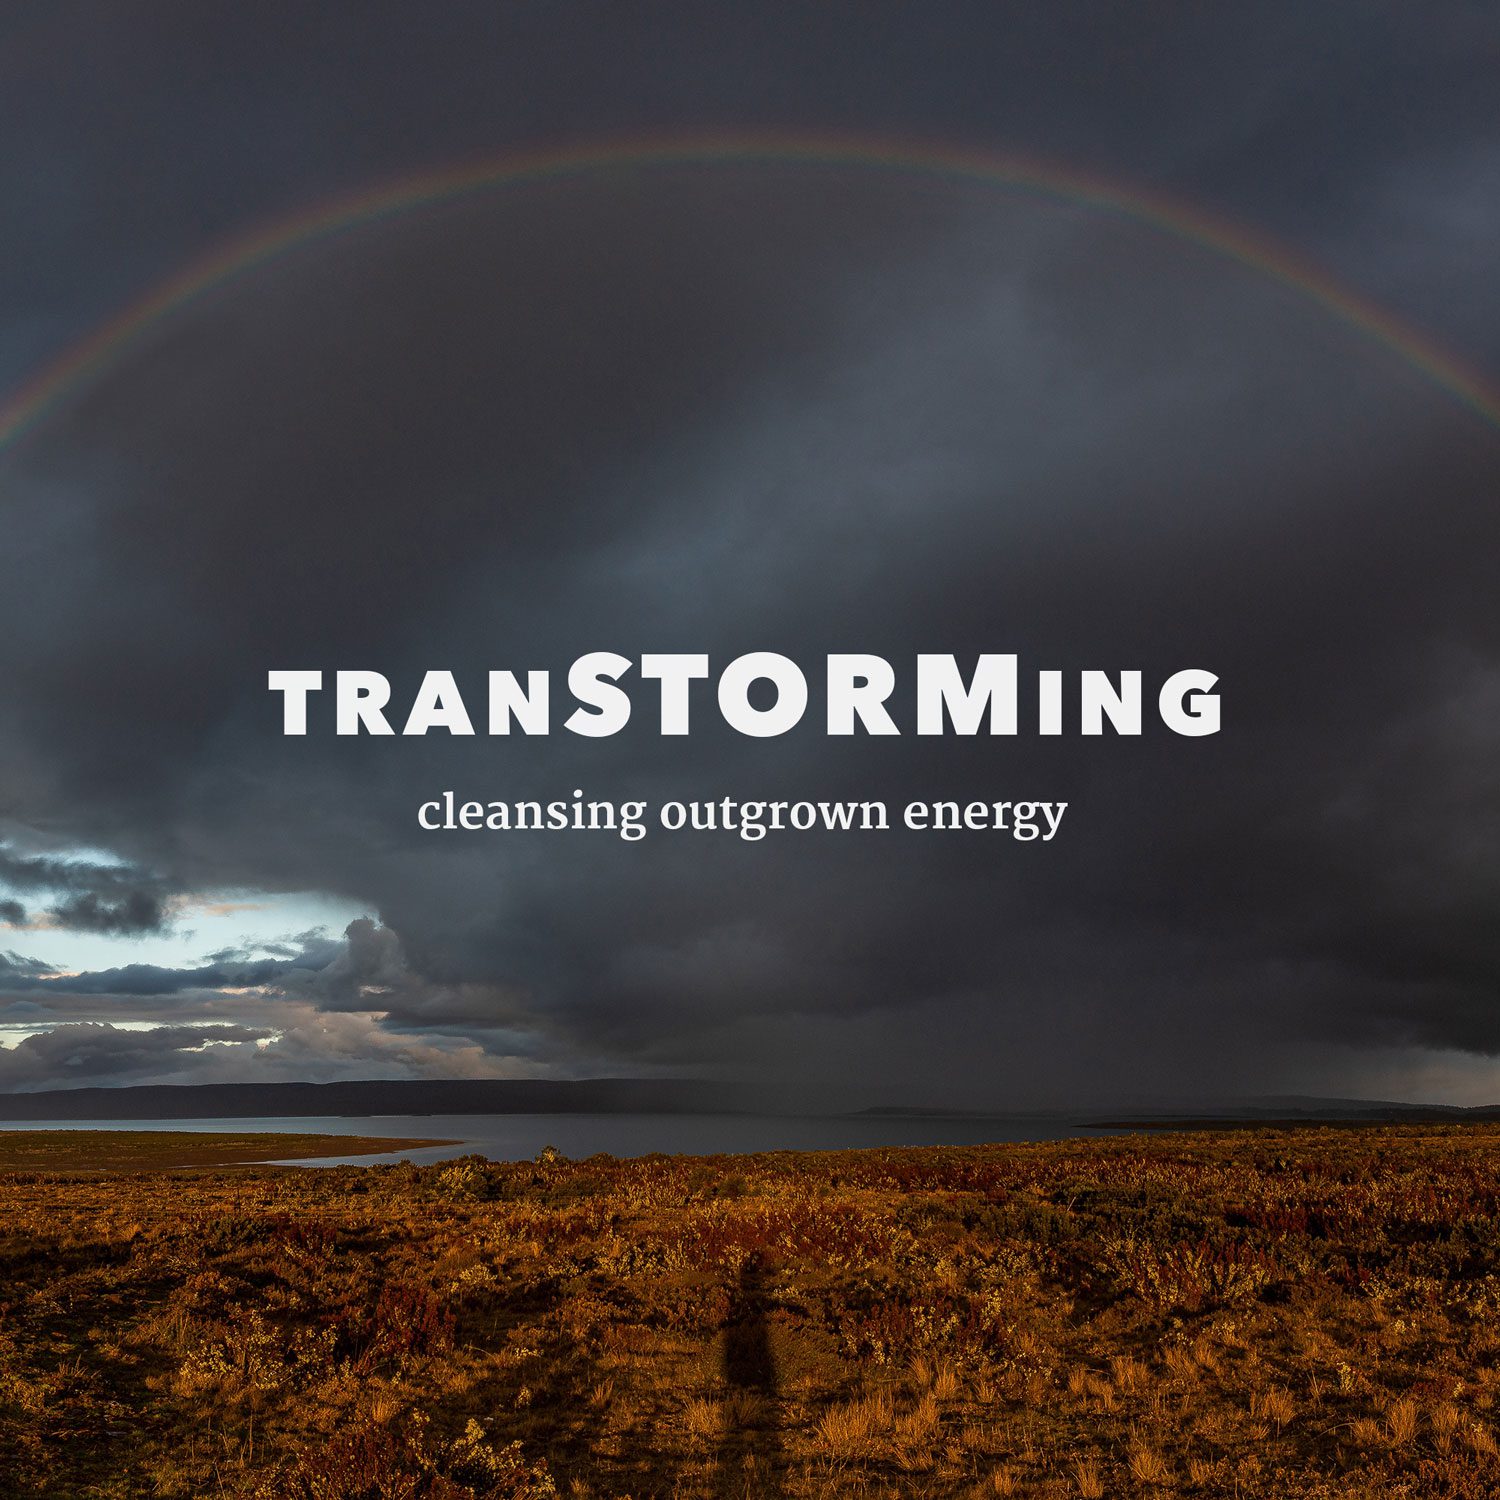 TRANSTORMING – cleansing outgrown energy